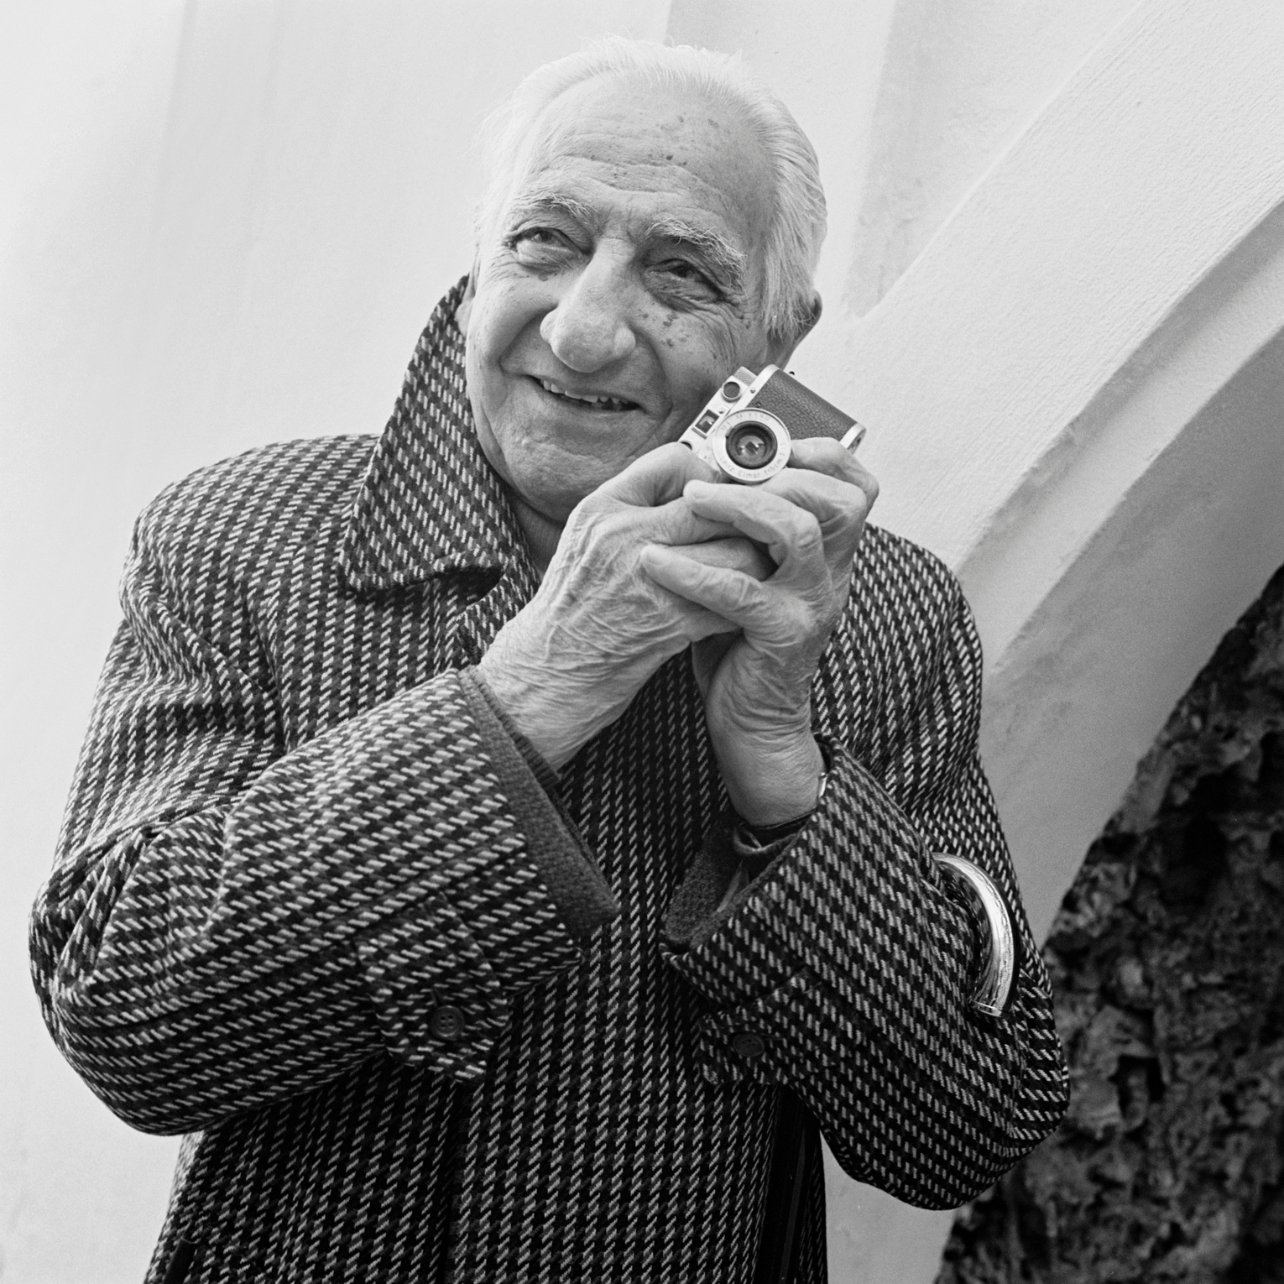 Black and white portrait of Paolo di Paolo holding his Leica camera photographed by Weber